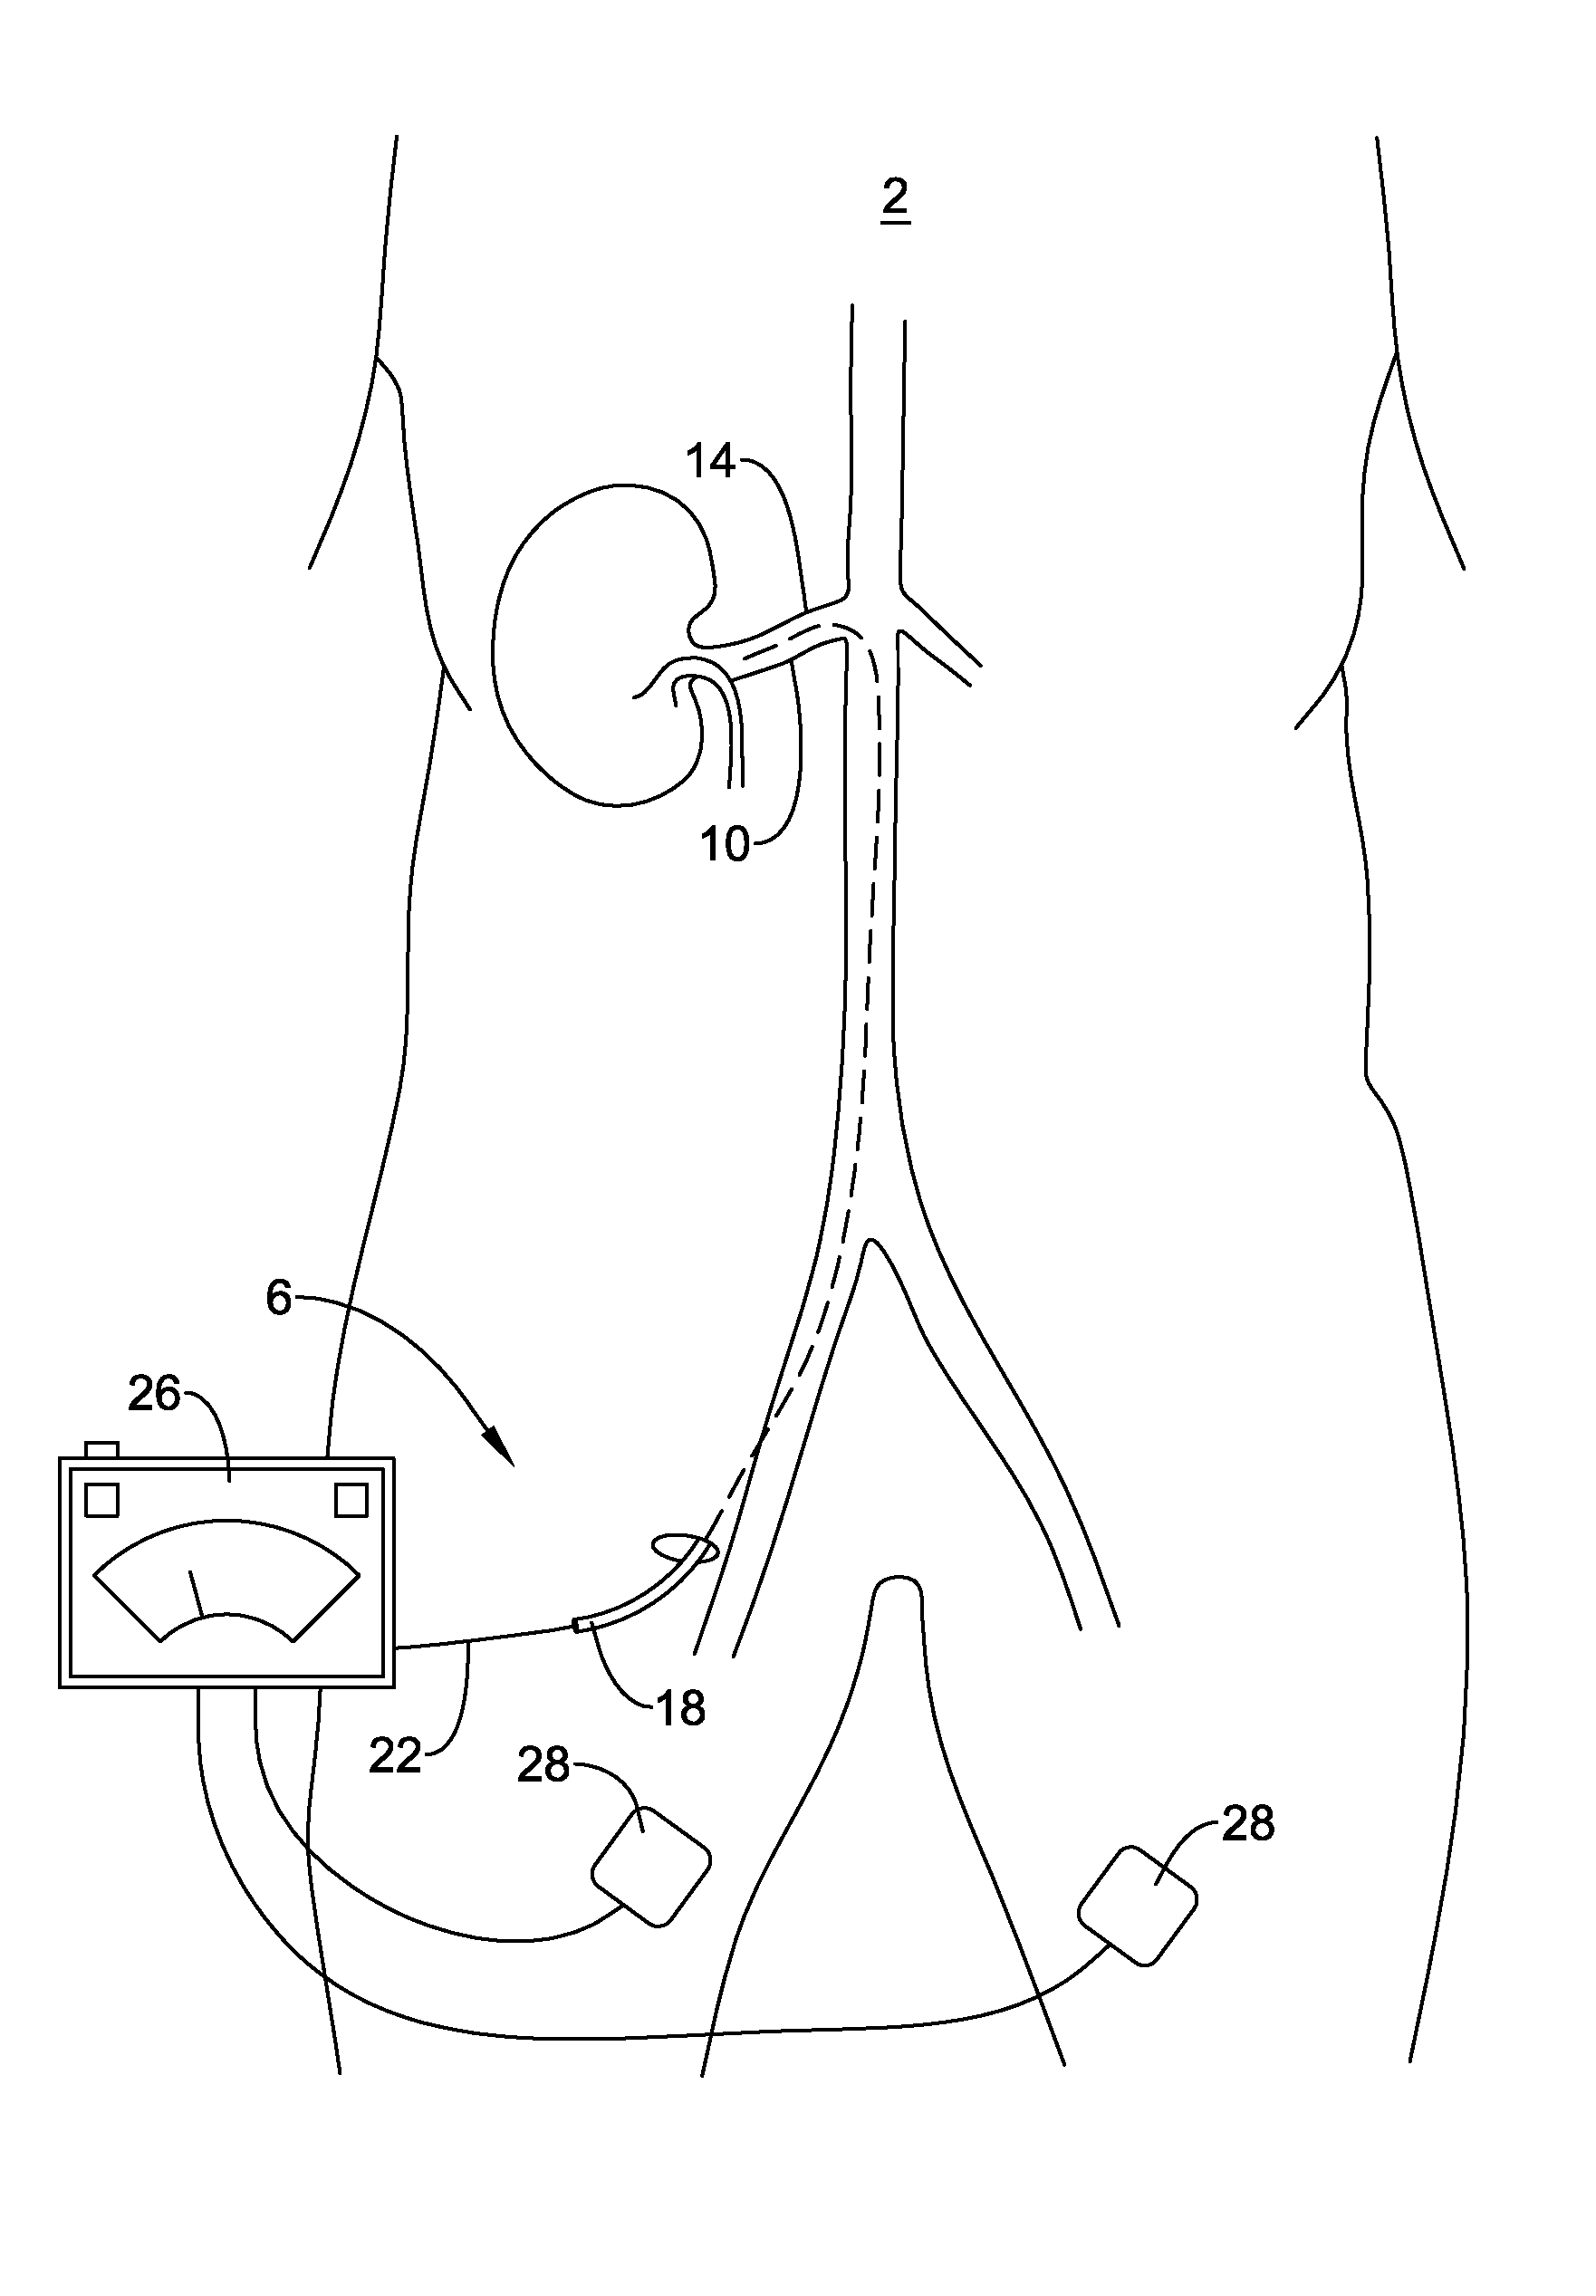 Catheter having rib and spine structure supporting multiple electrodes for renal nerve ablation